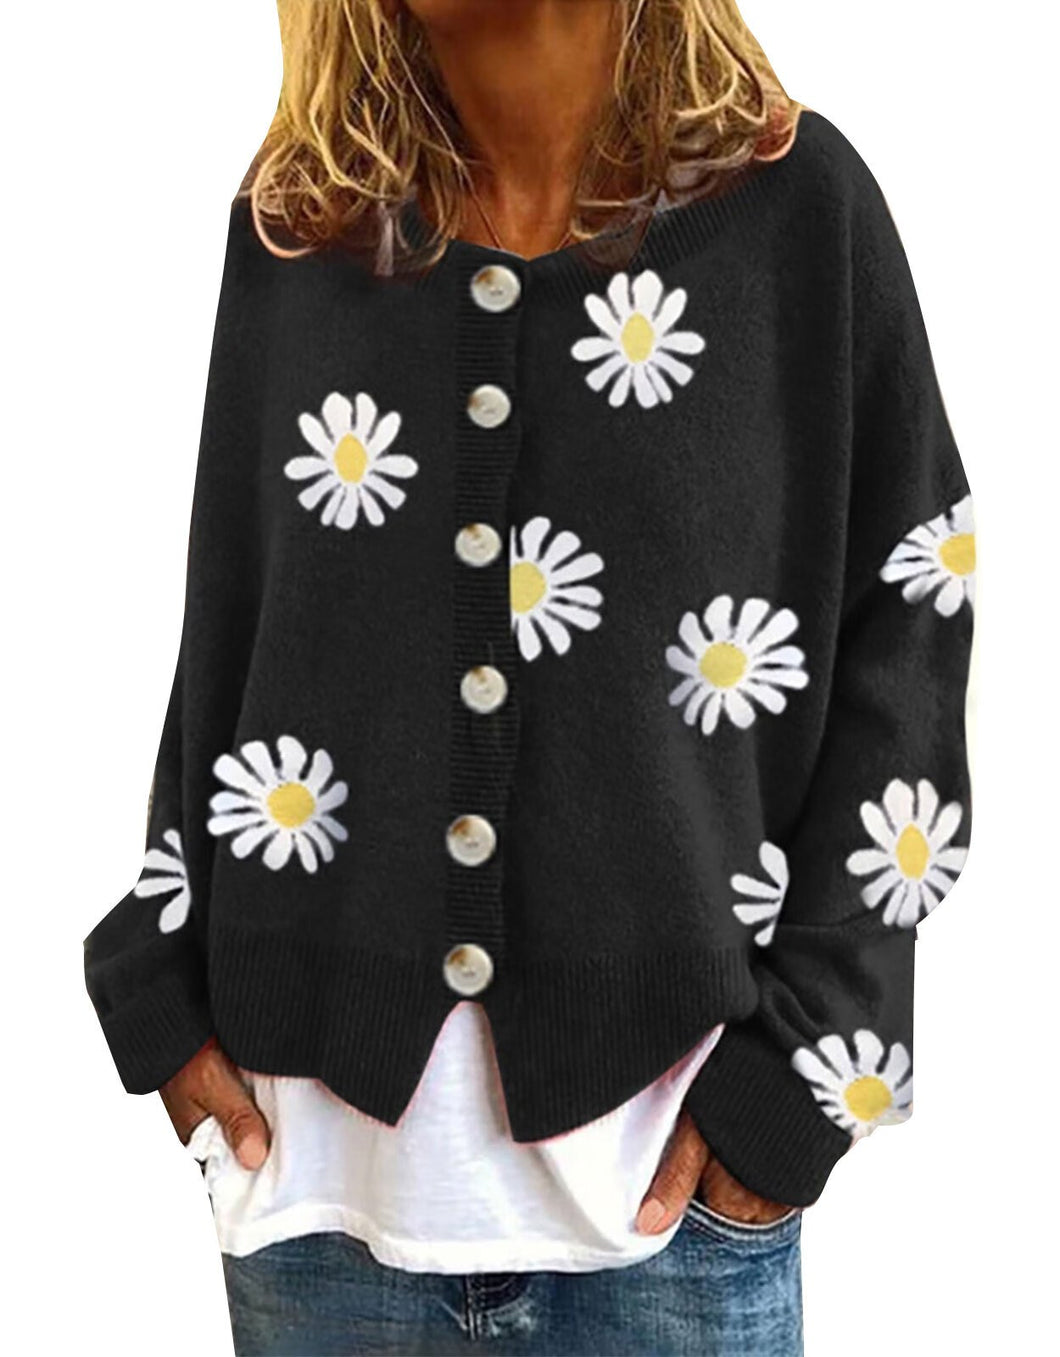 Cardigan Sweaters with Daisy Flower Floral Print